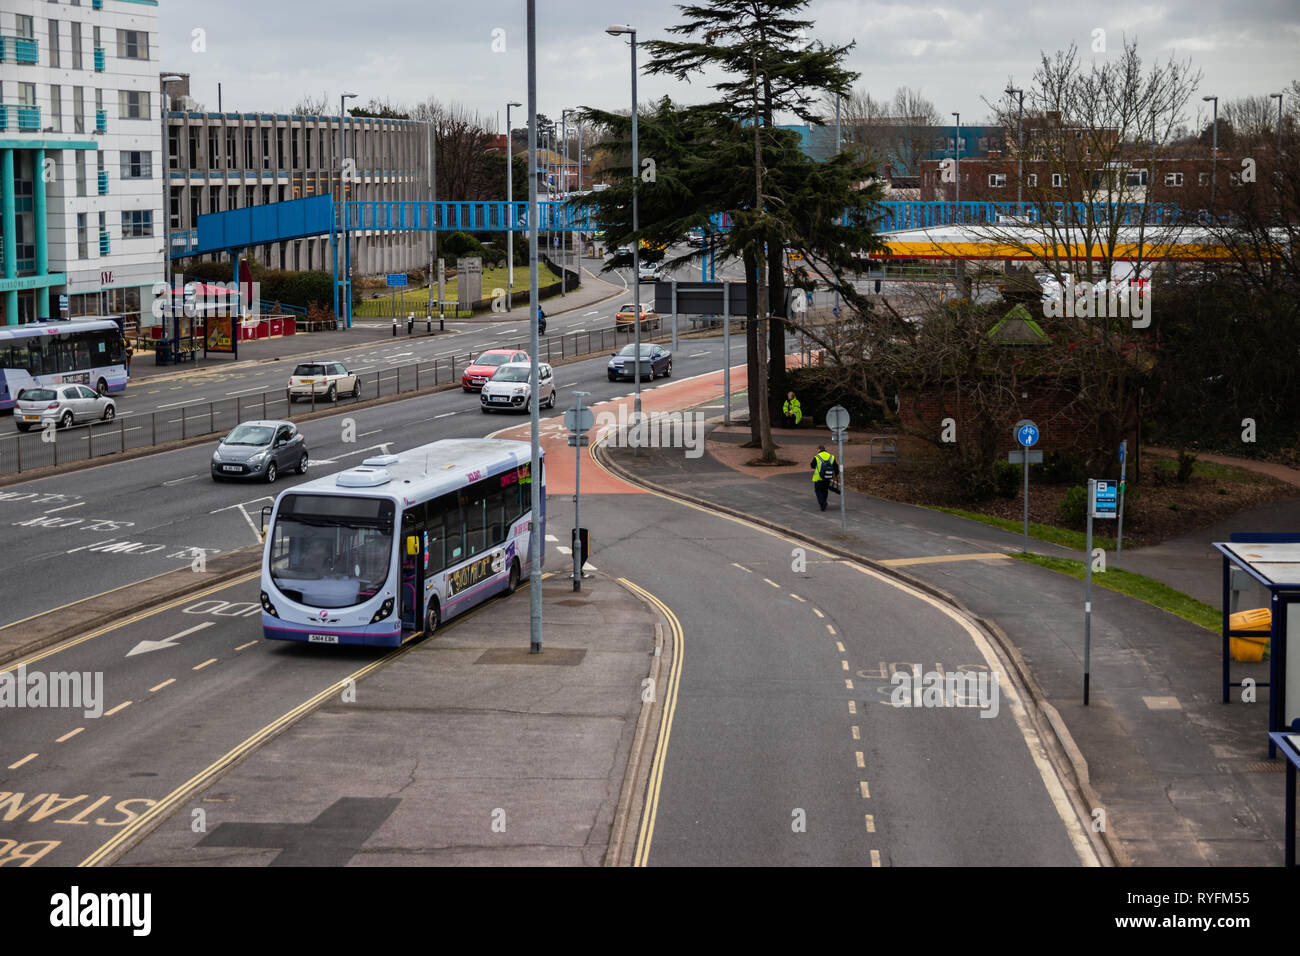 First bus at Hilsea Bus station, Portsmouth, In the bus lane Stock Photo